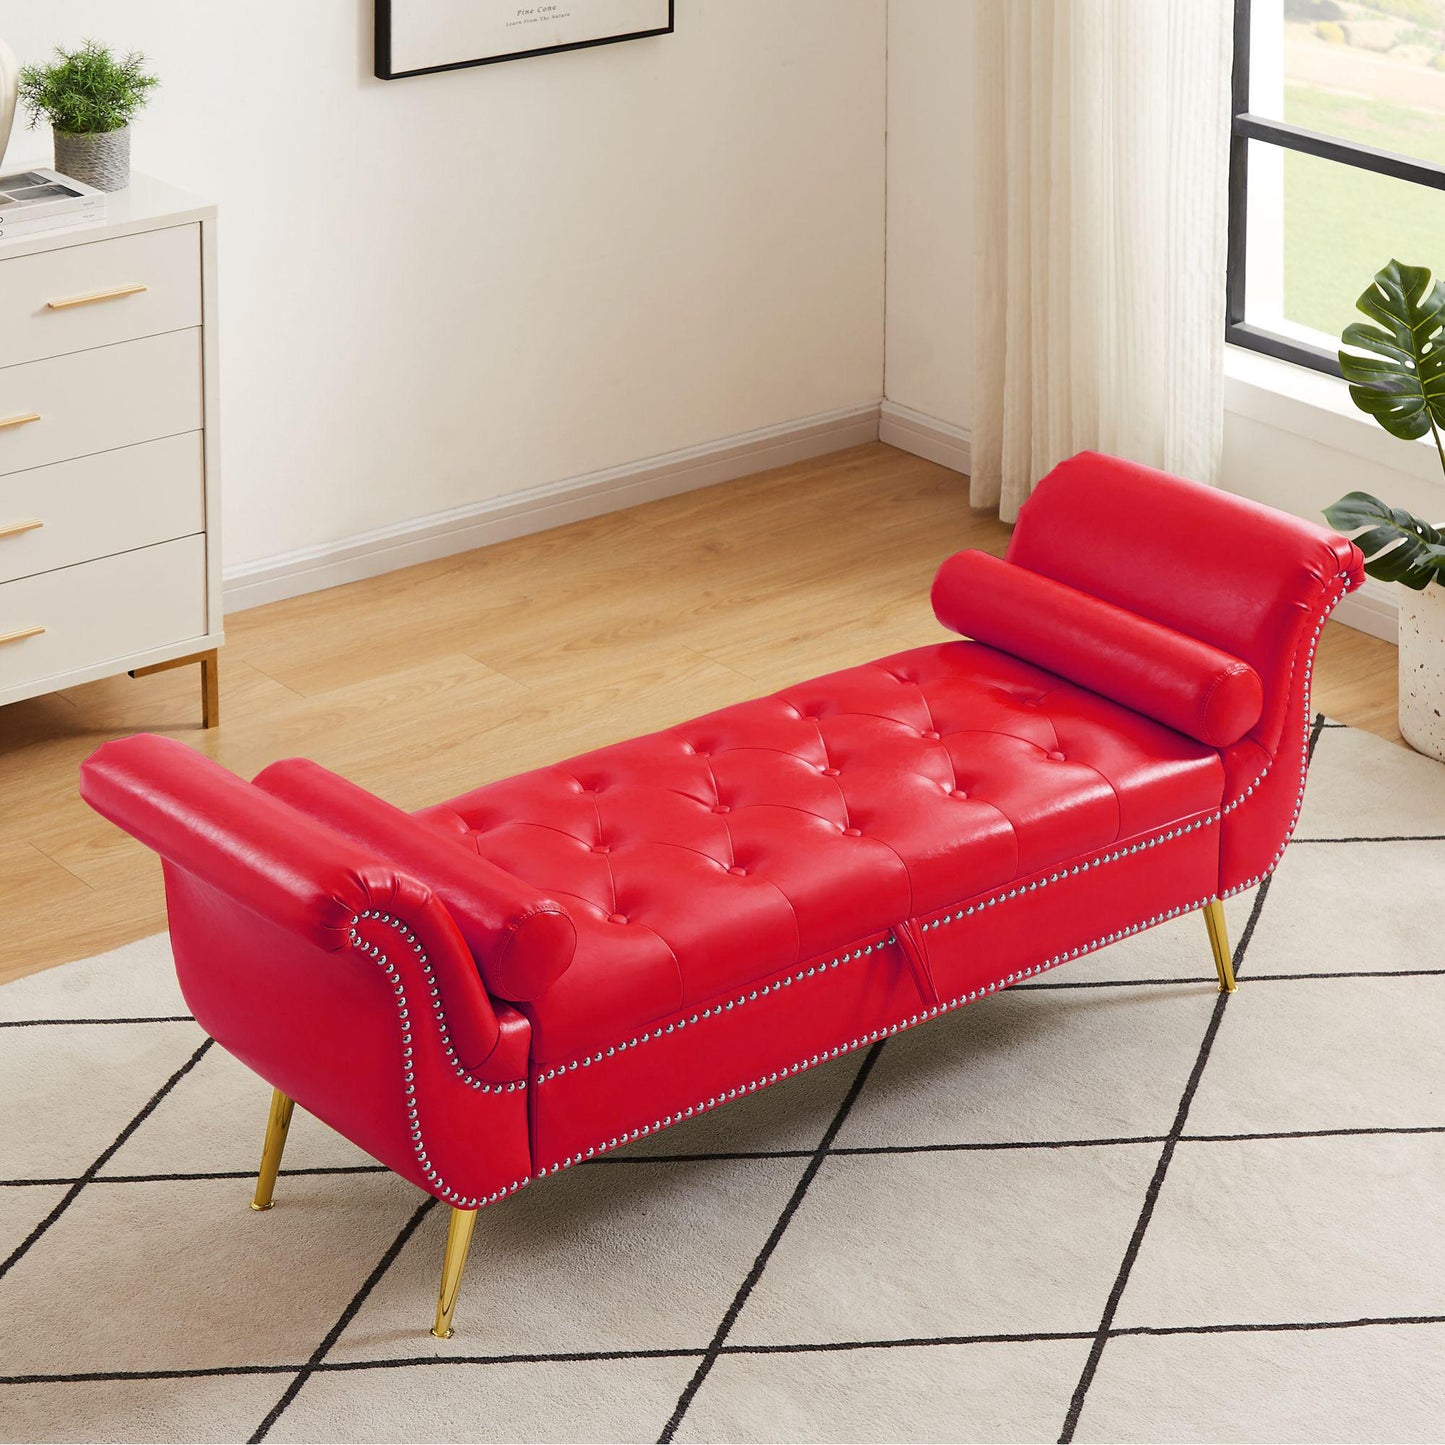 Sitting Bench PU Leather with Storage Space and 2 Pillows Hardware Feet